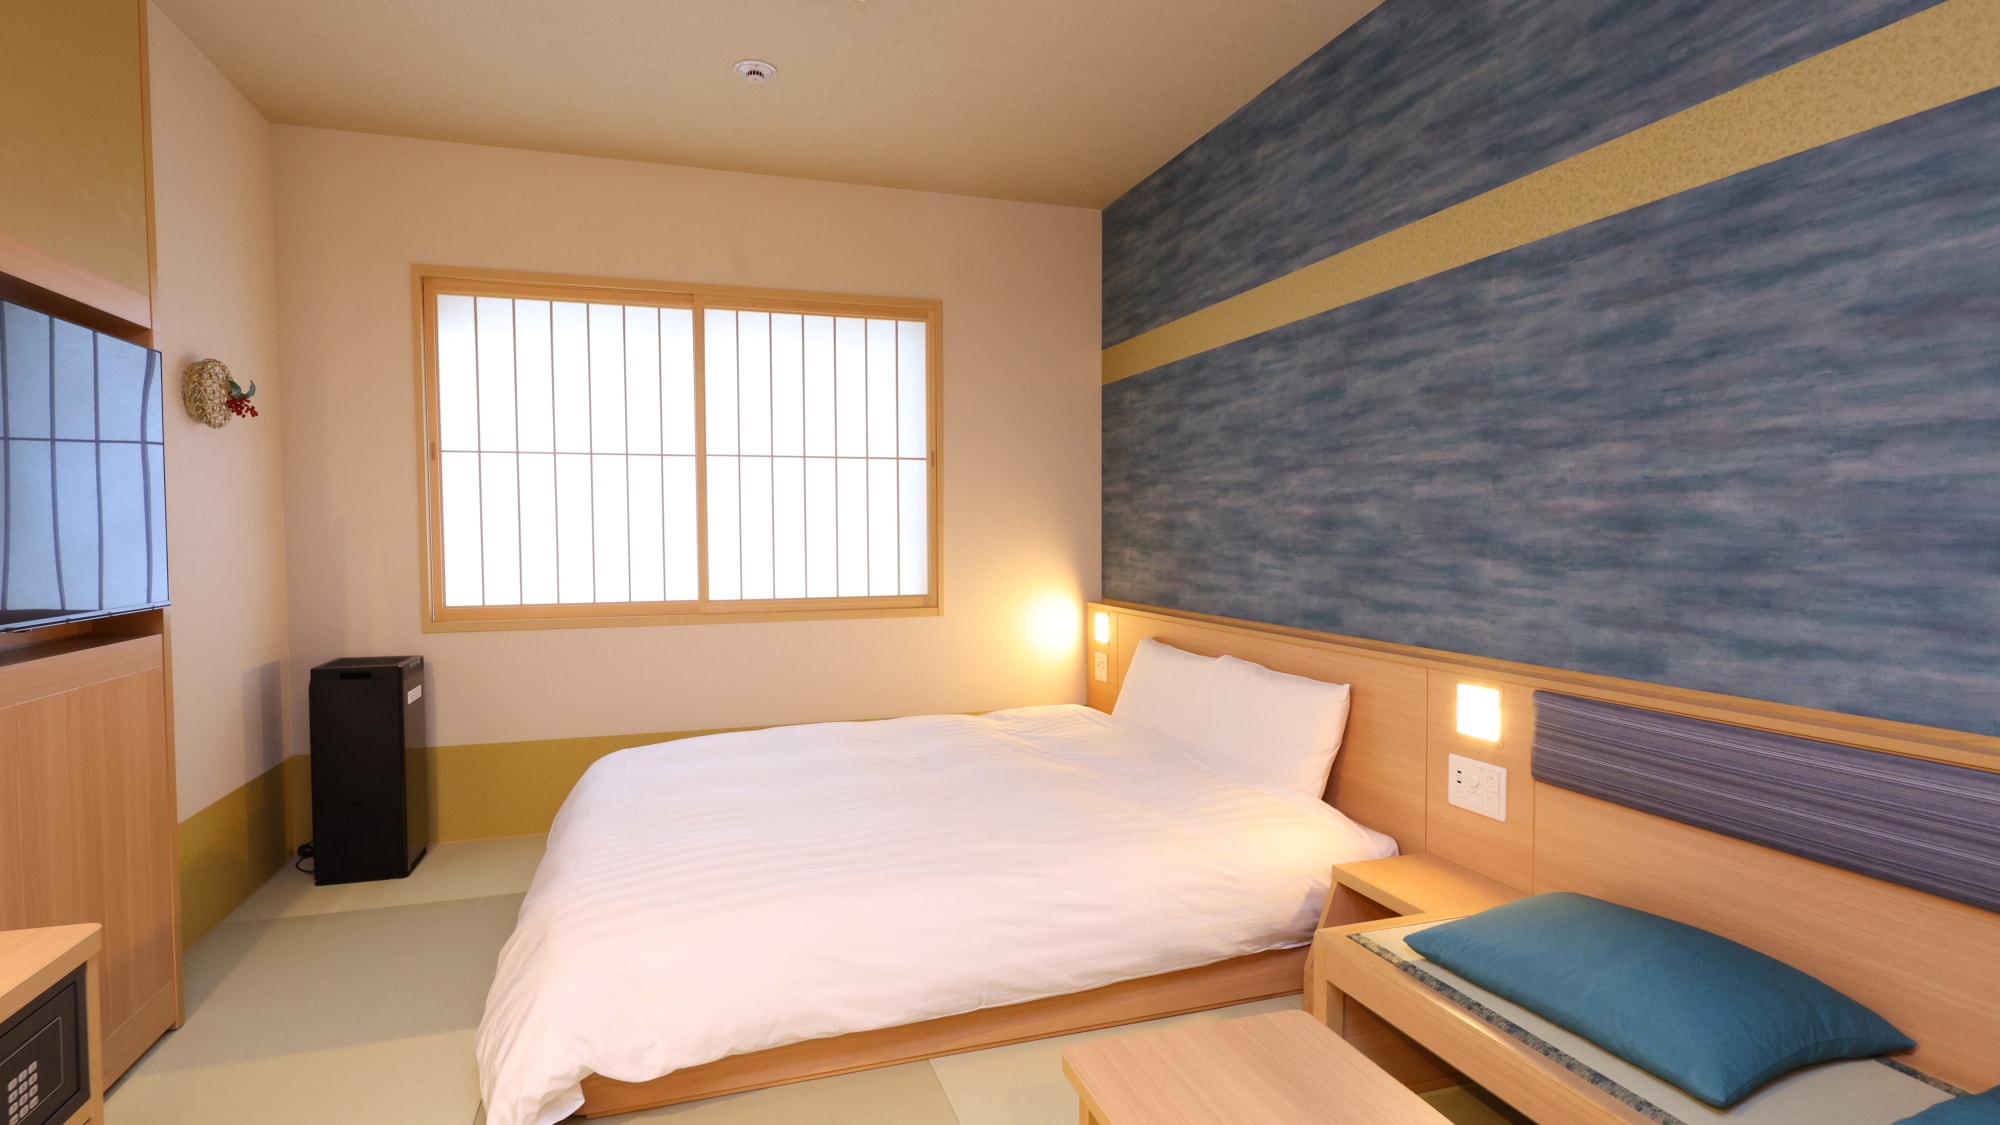 [Non-smoking] Queen room 20.82-23.74 square meters, 1 Serta bed (1600'1950mm)